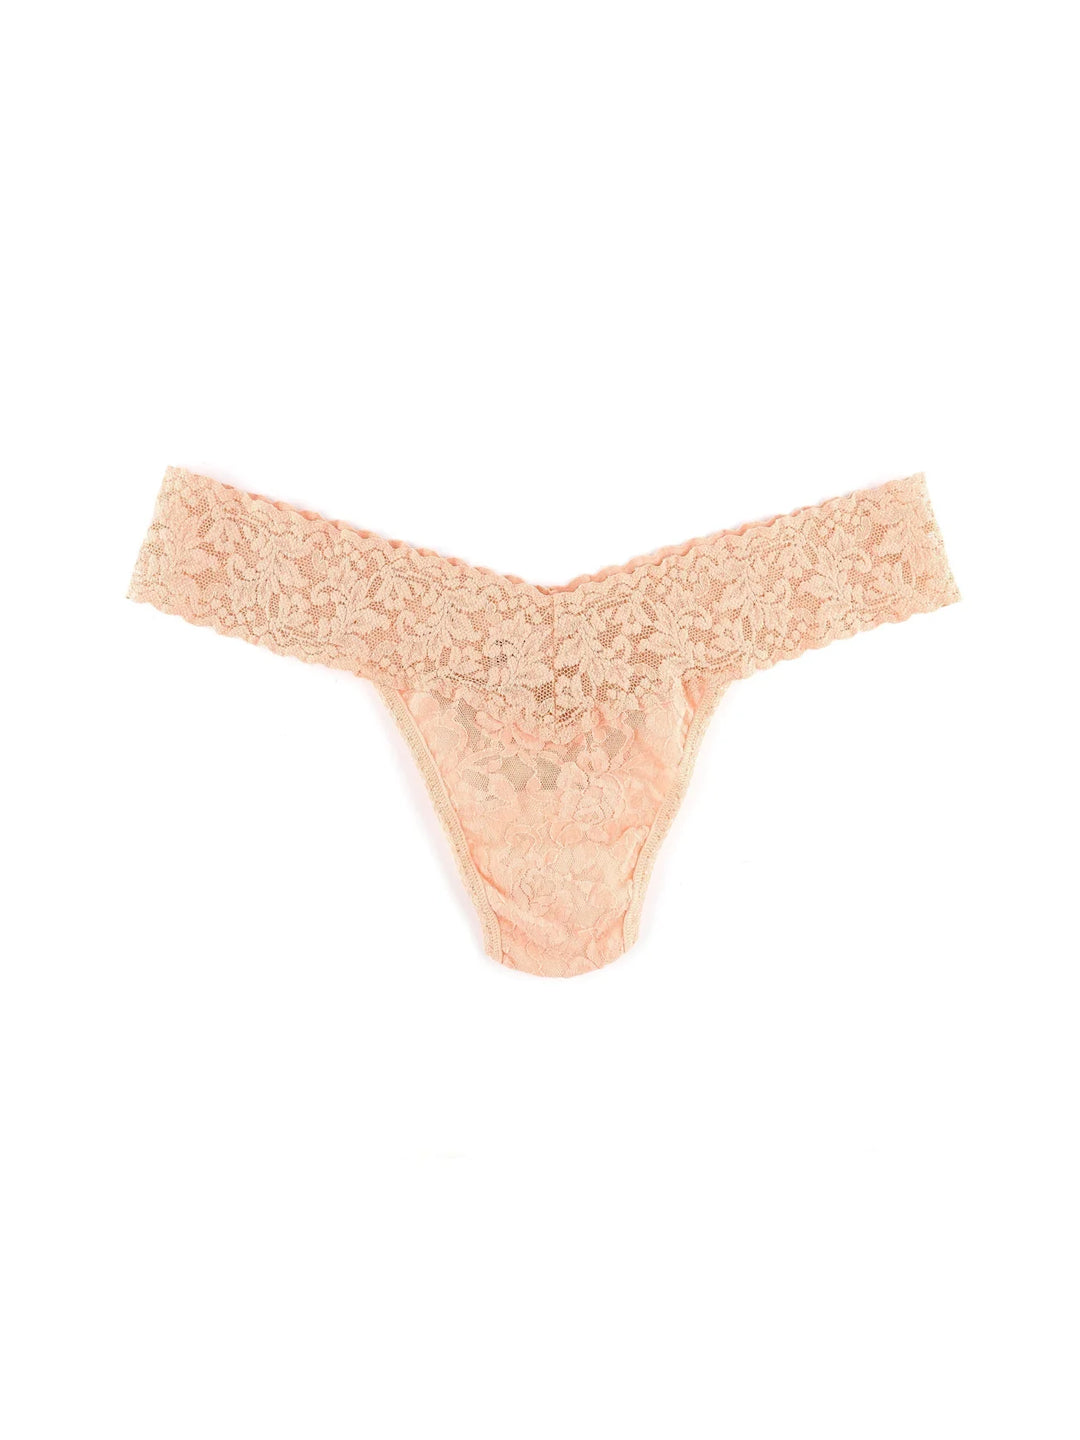 LOW RISE THONG | BLOSSOM